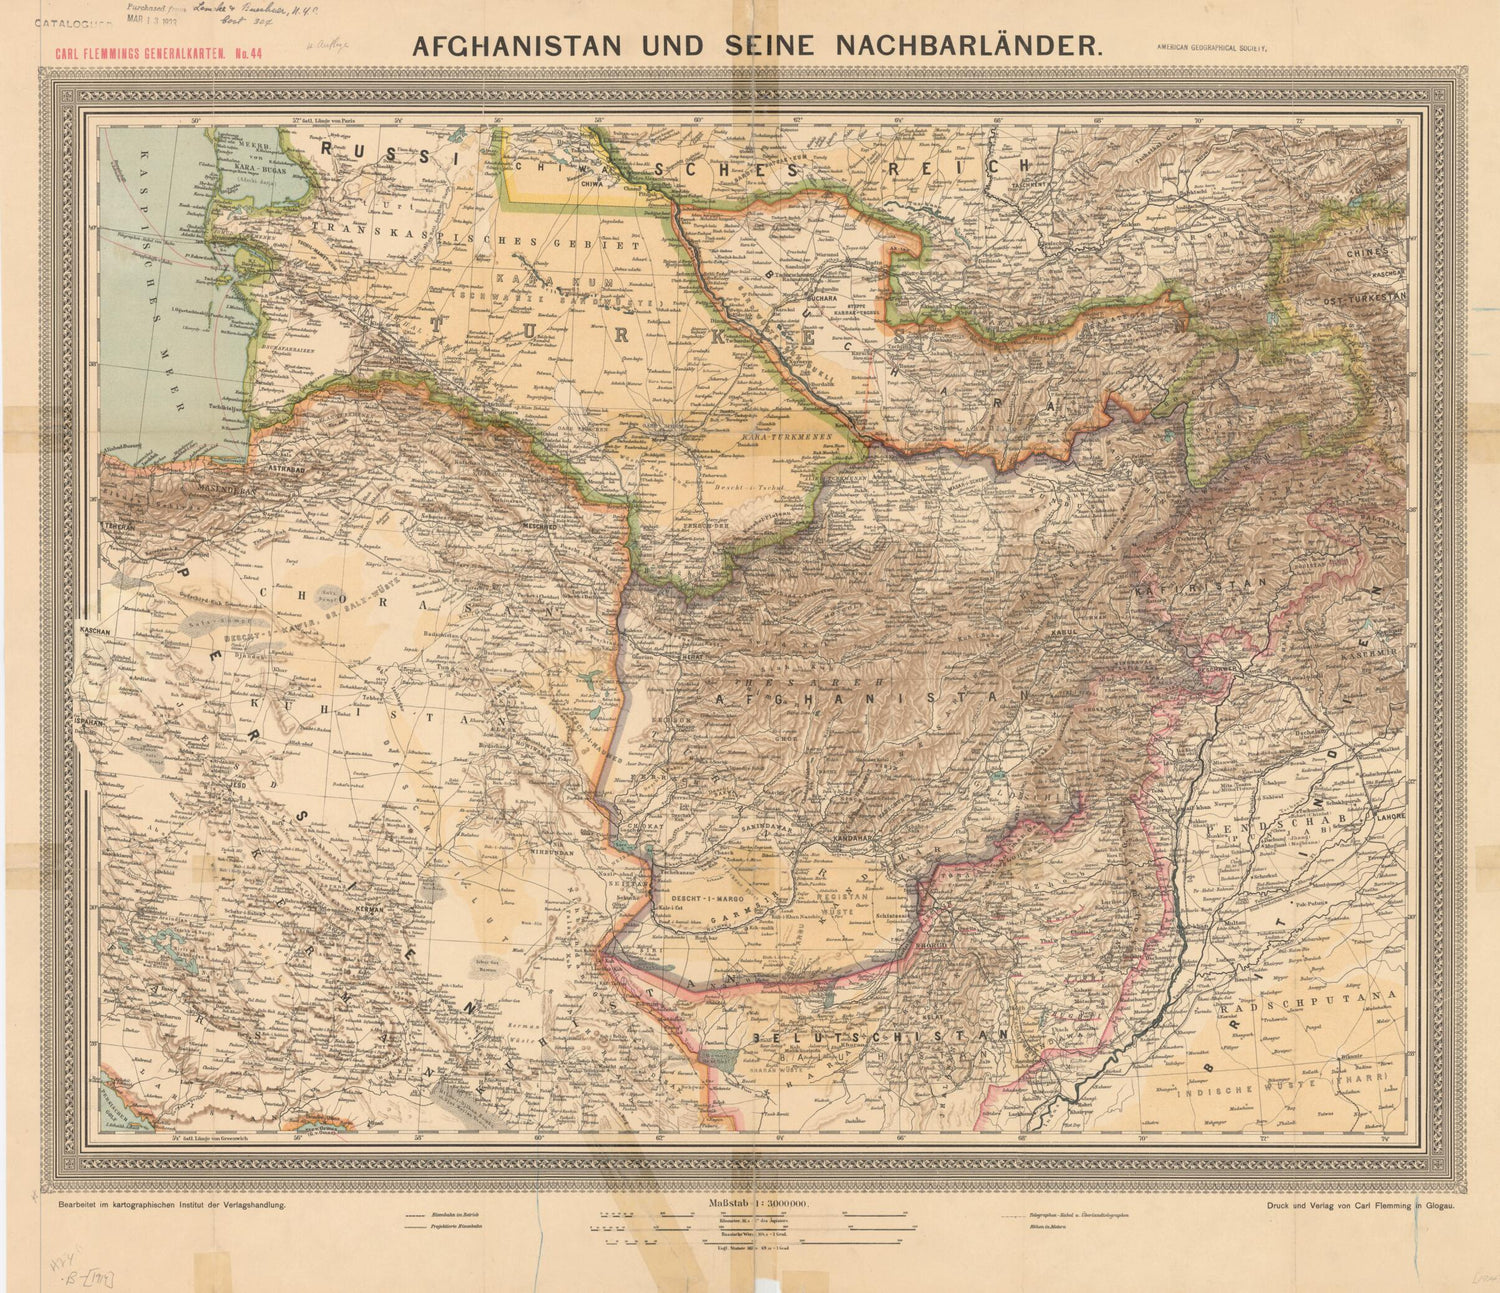 This old map of Afghanistan and Its Neighboring Countries. (Afghanistan Und Seine Nachbarländer) from 1914 was created by  Carl Flemming (Firm), F. (Friedrich) Handtke in 1914